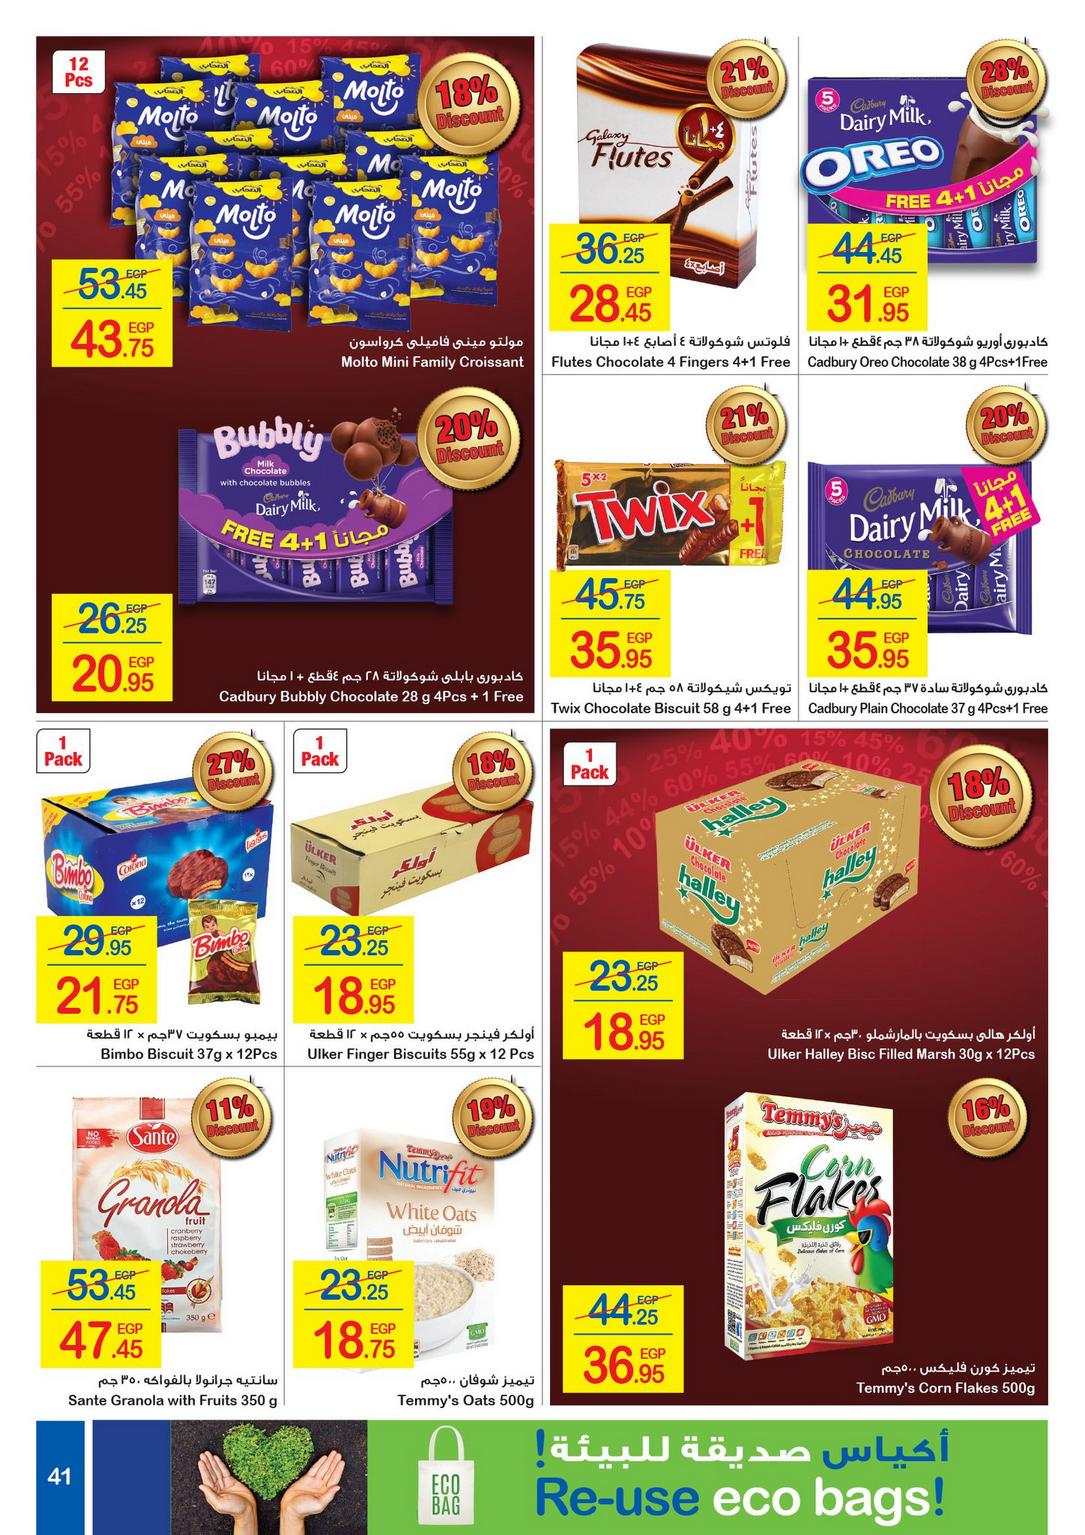 Carrefour Deals from 1/1 till 14/1 | Carrefour Egypt 42